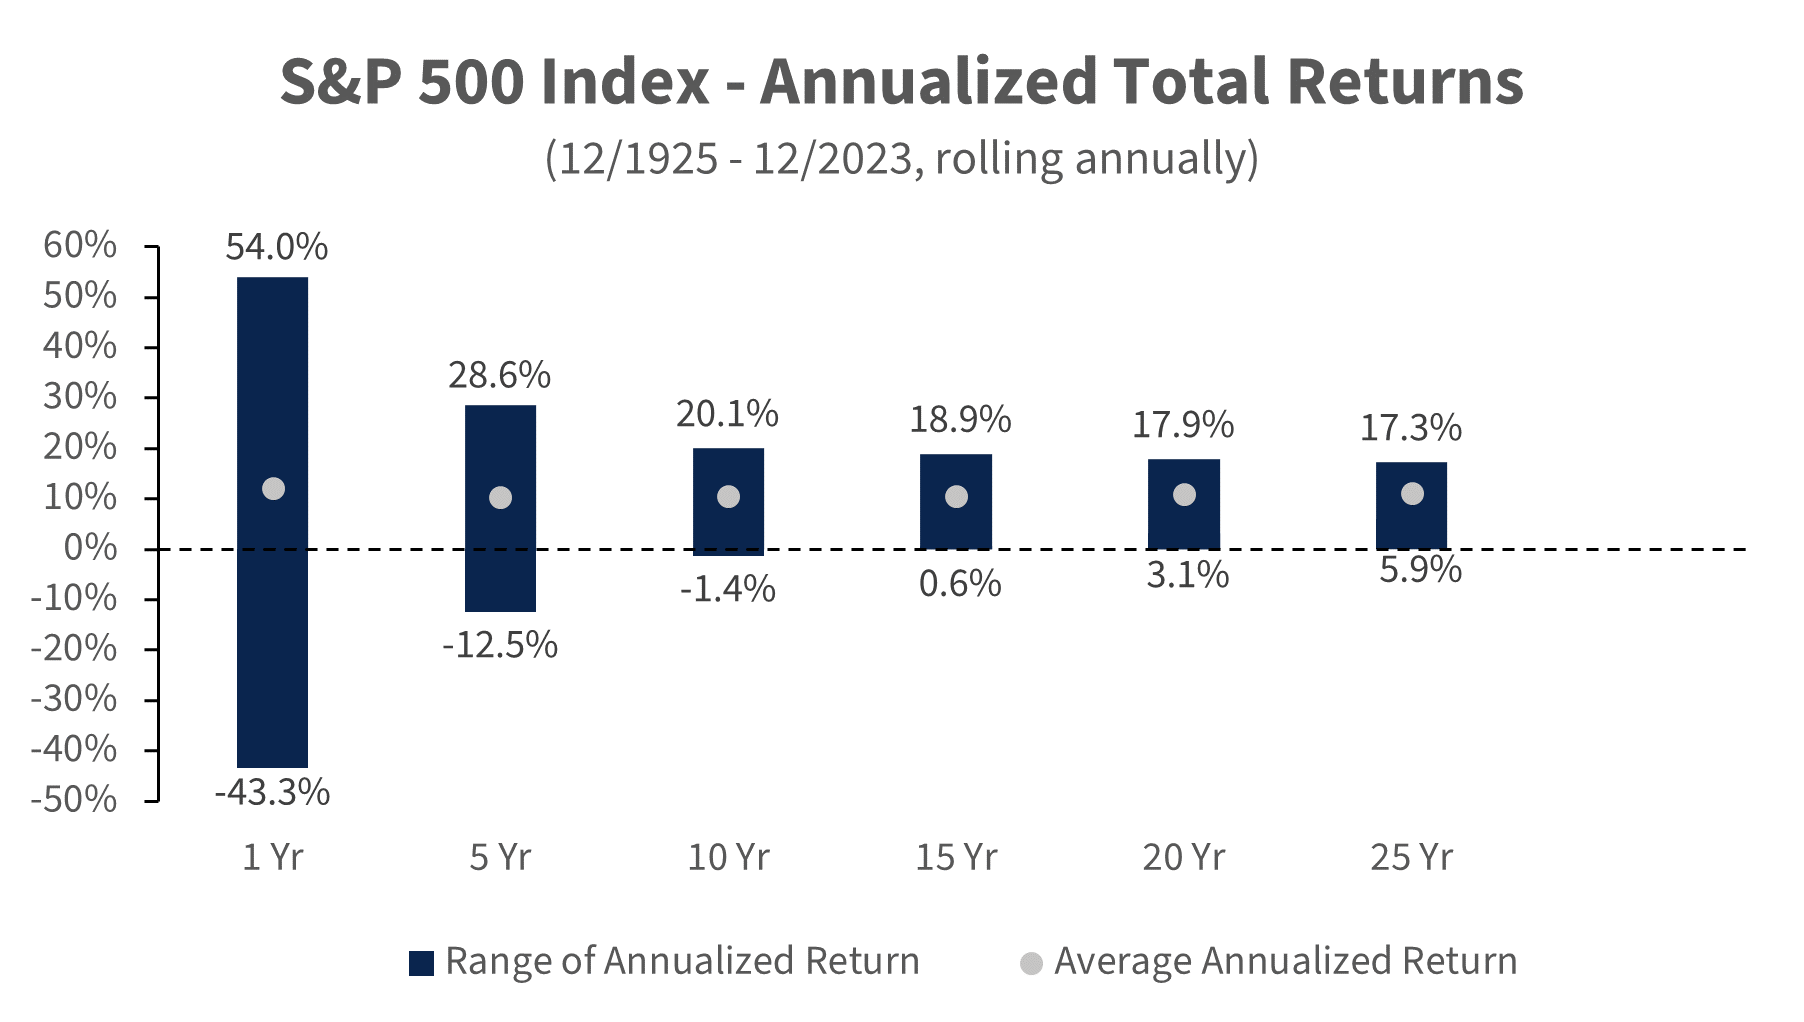 Chart of the S&P 500 Index - Annualized Total Returns